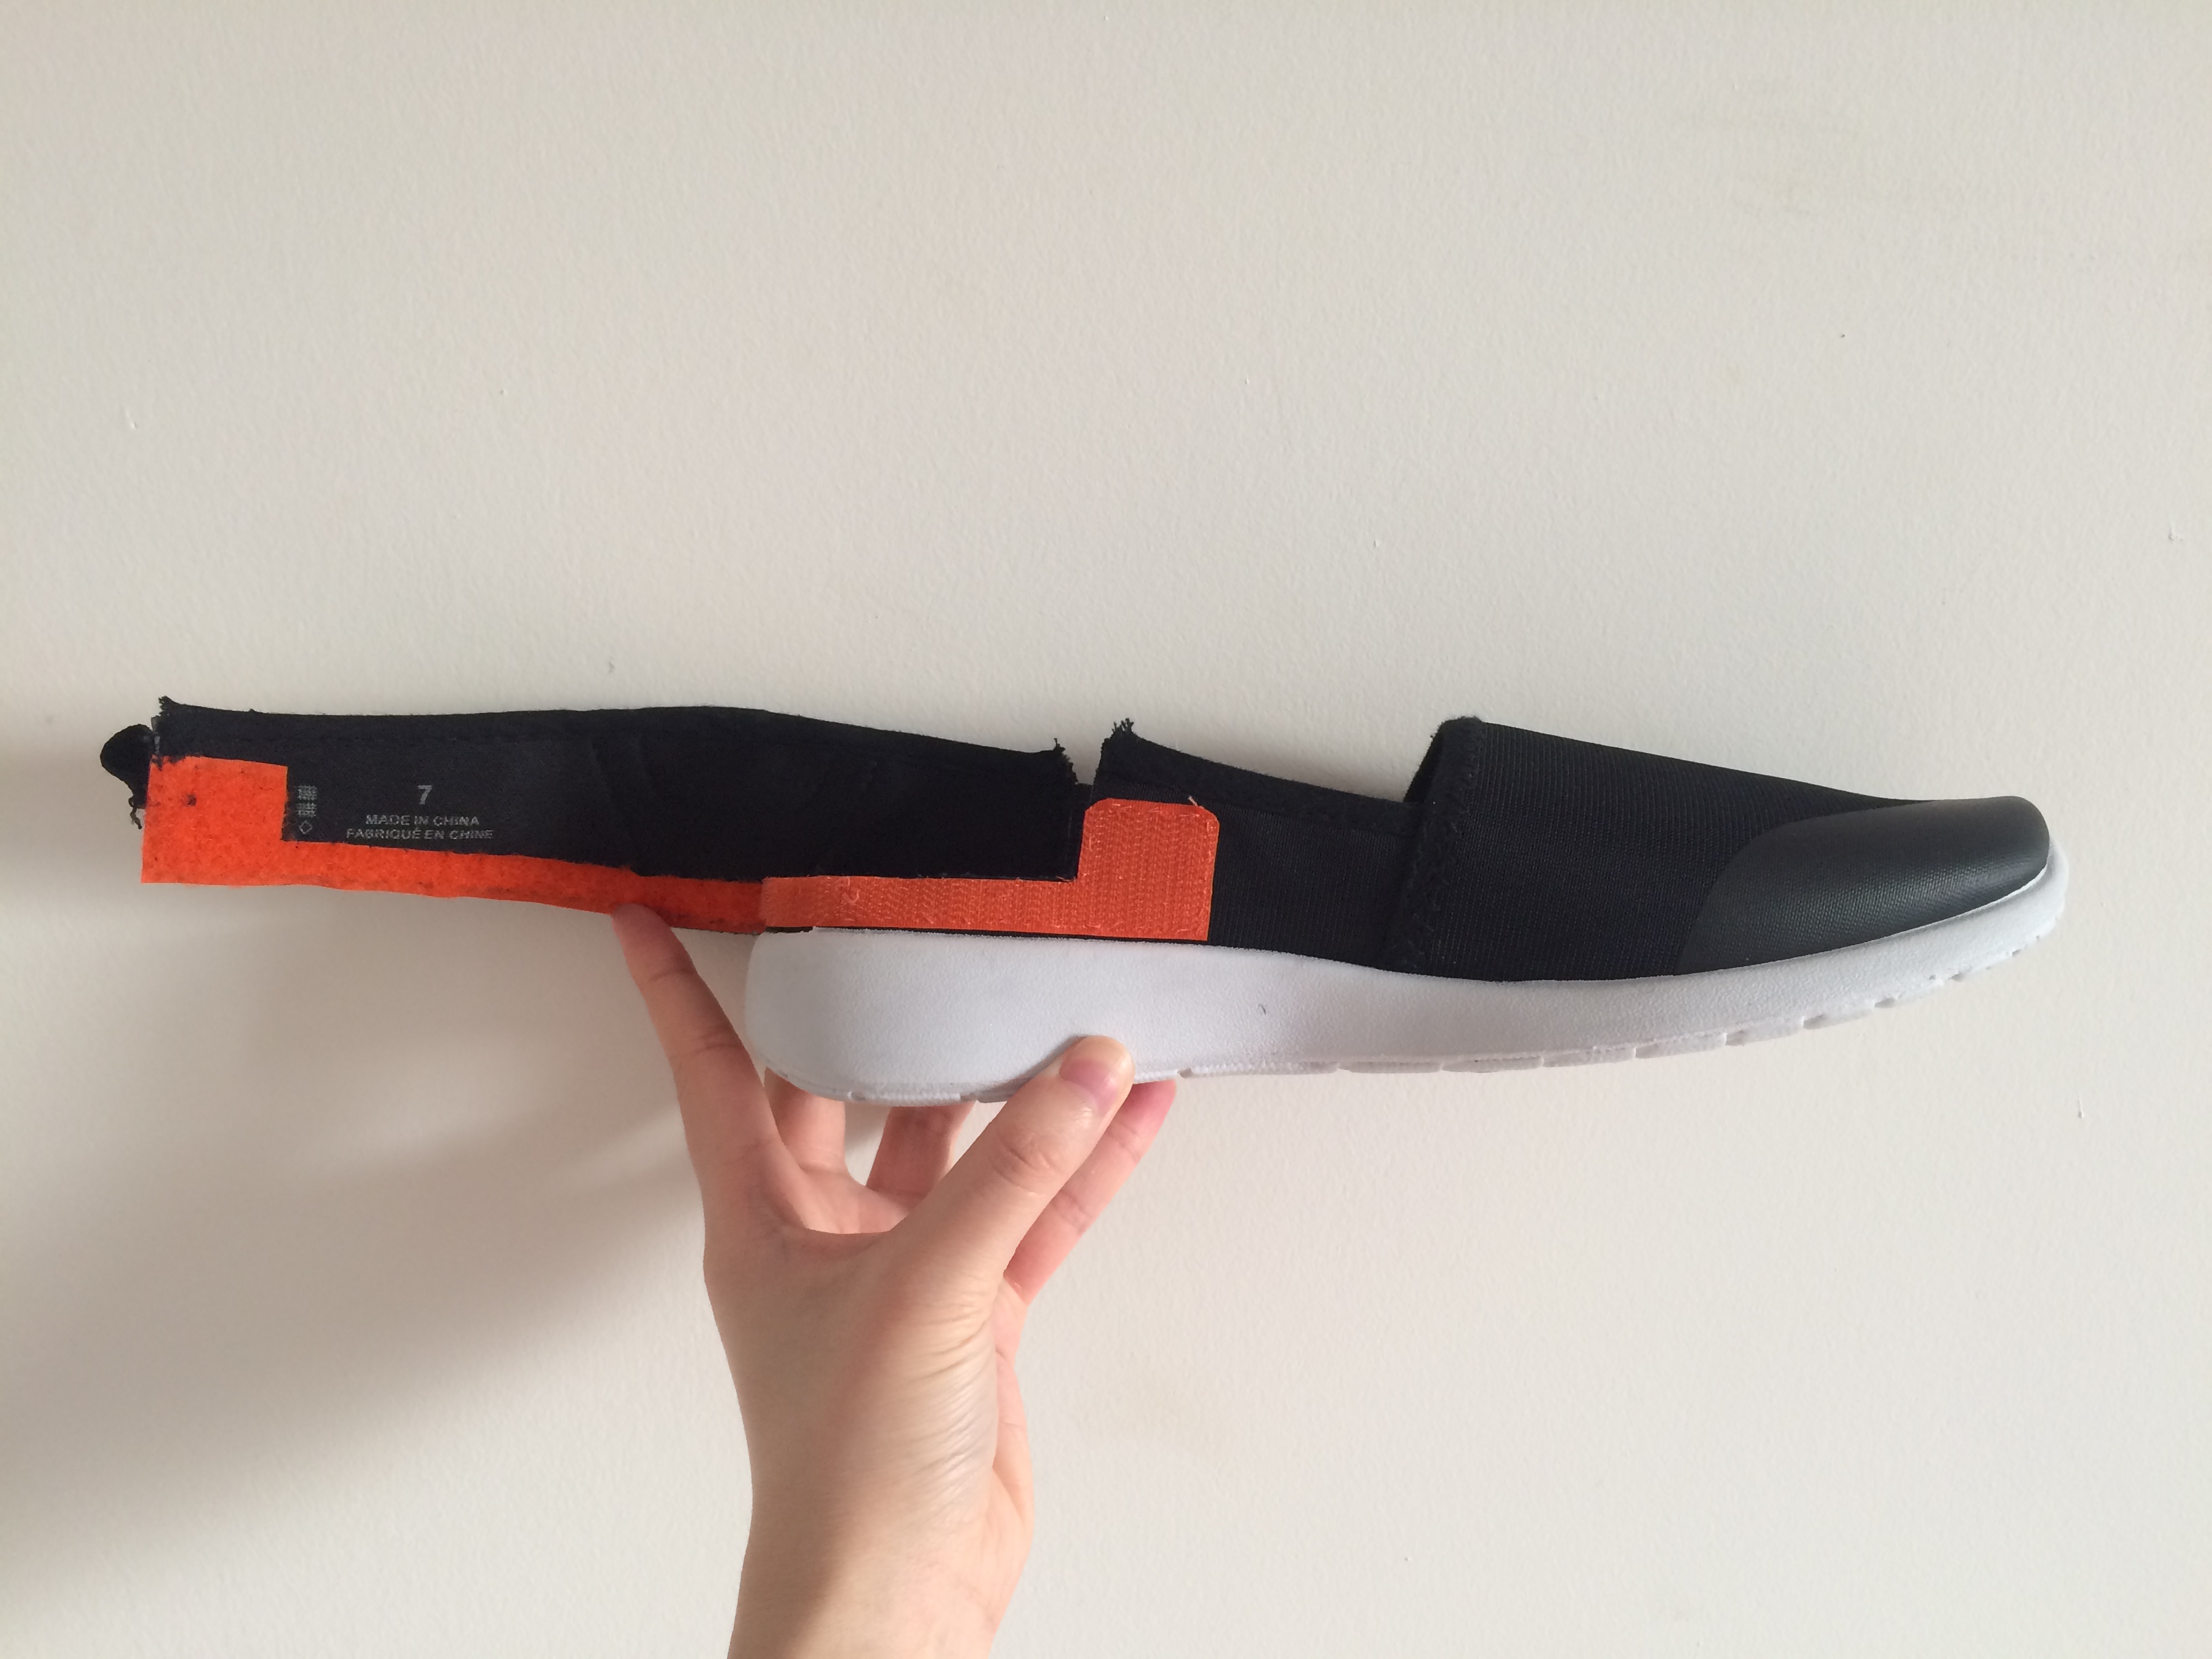 Peel Heel sample: a hand holds up a black shoe with orange velcro that allows the heel to be deattached